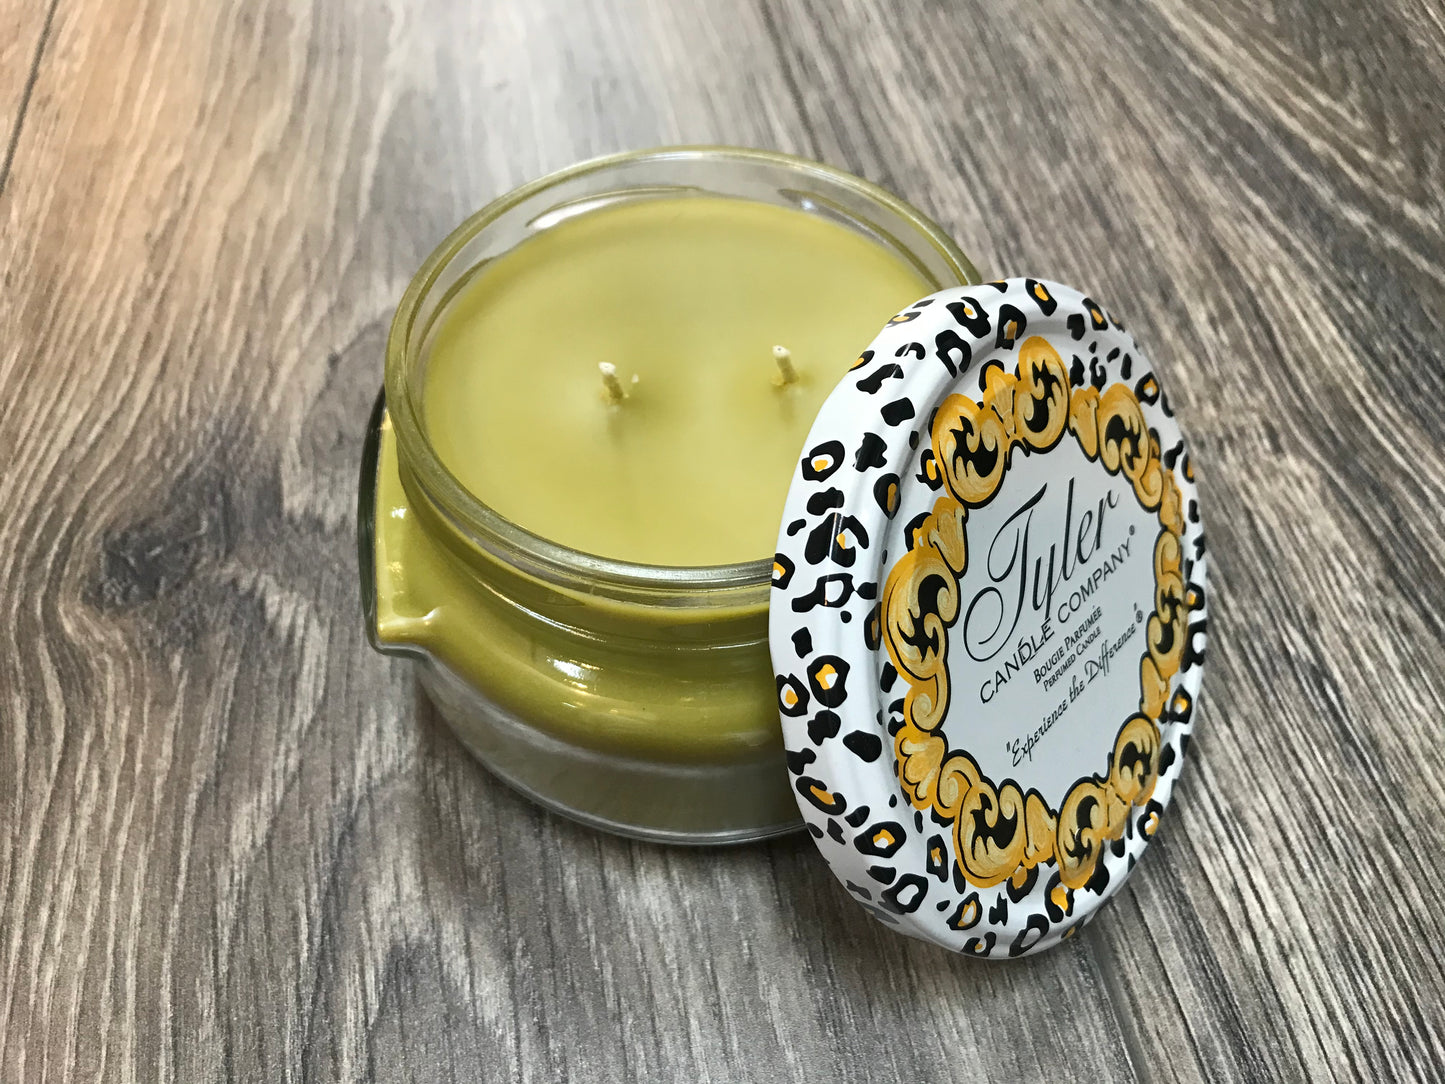 Tyler Candle - 11.0 oz Jar - Click to